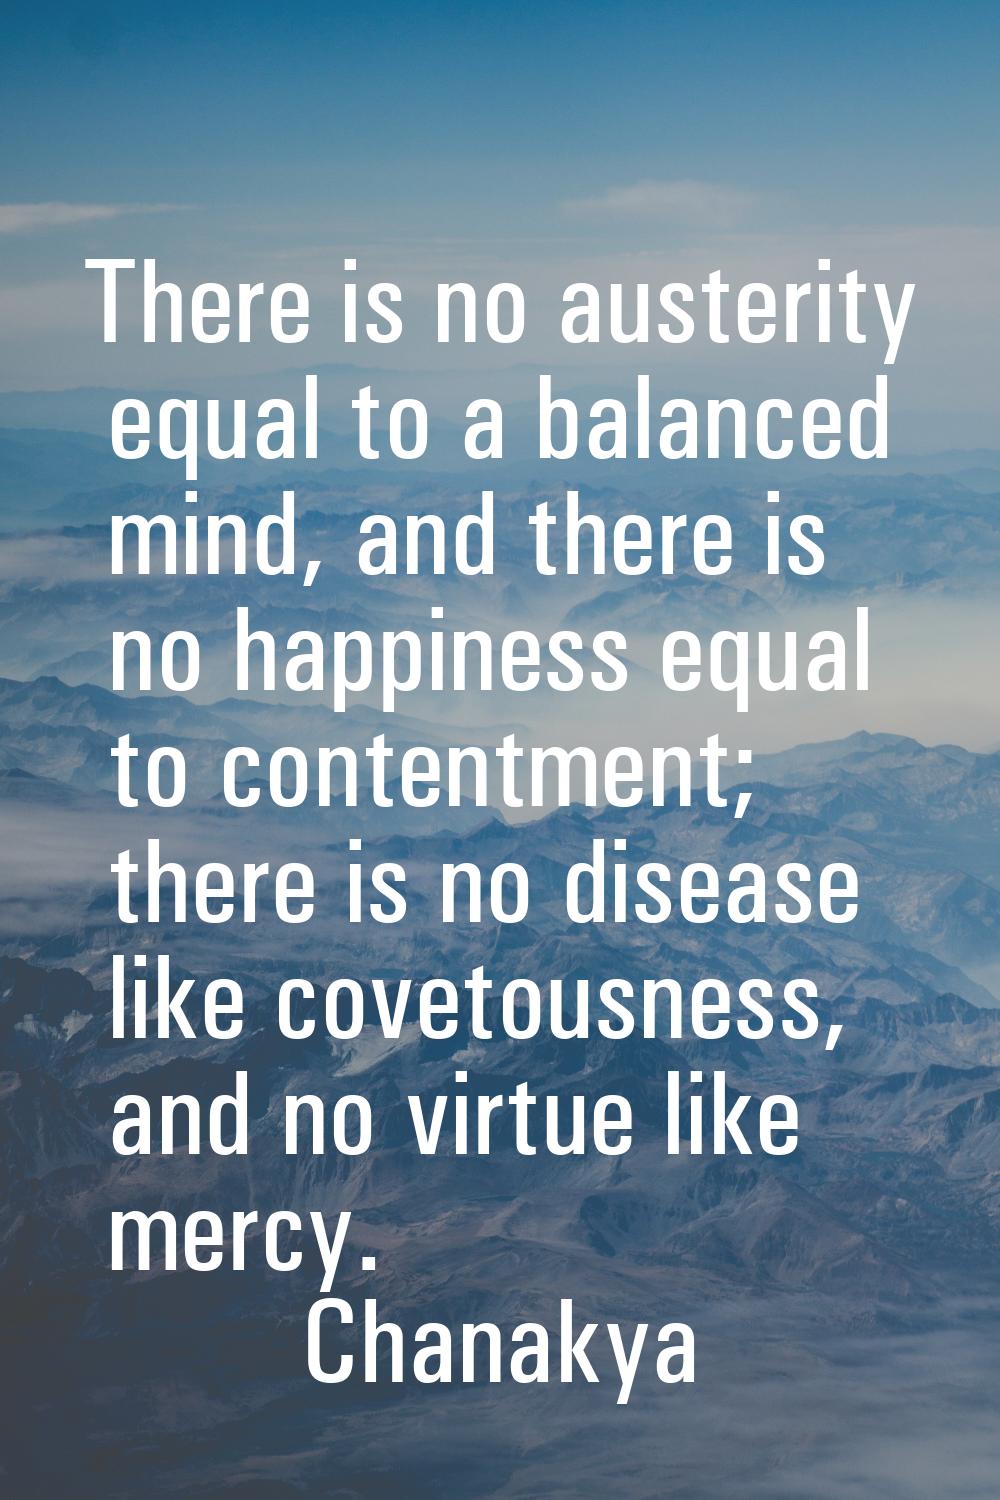 There is no austerity equal to a balanced mind, and there is no happiness equal to contentment; the